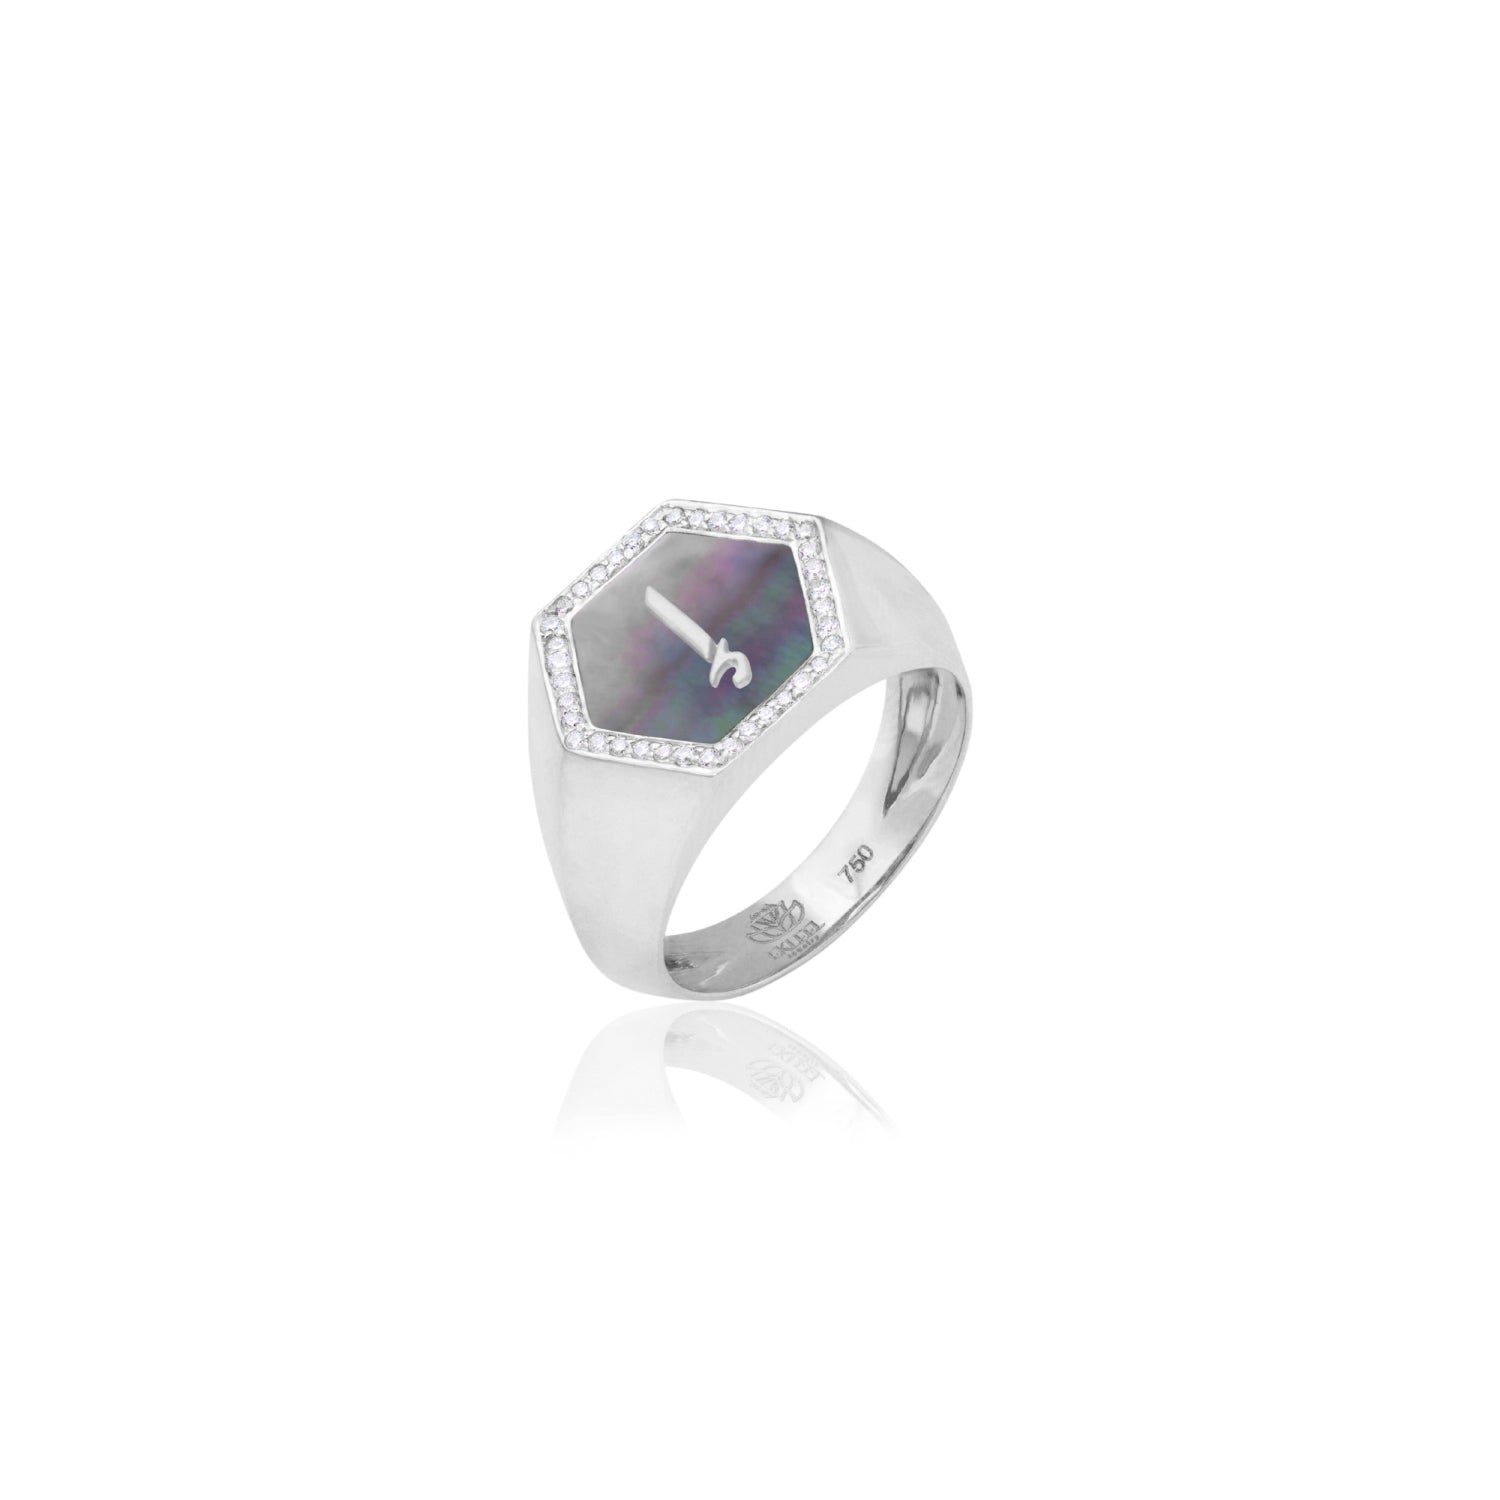 Qamoos 2.0 Letter إ Black Mother of Pearl and Diamond Signet Ring in White Gold